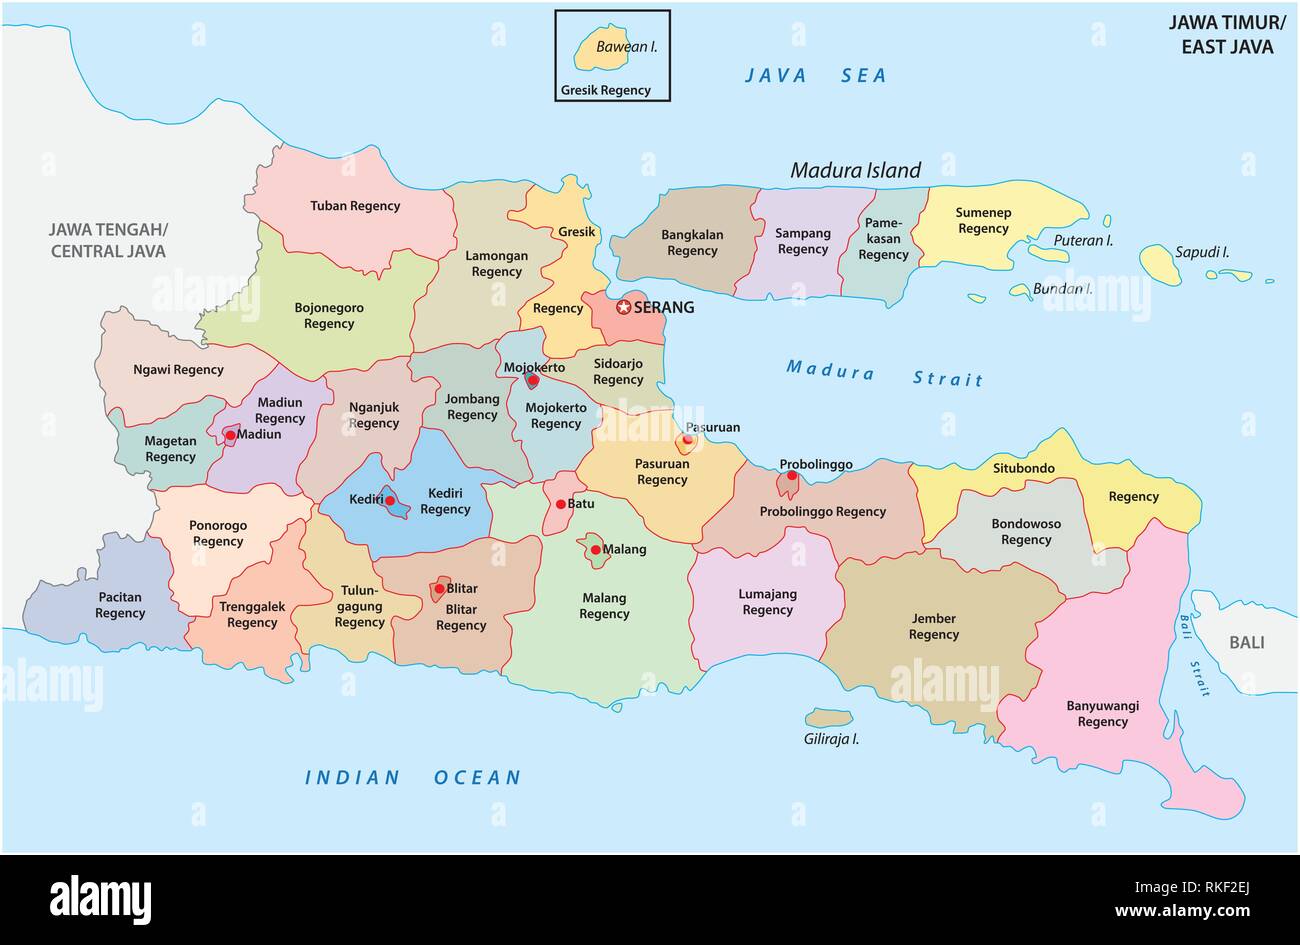 Jawa Timur, East Java administrative and political vector map, Indonesia Stock Vector